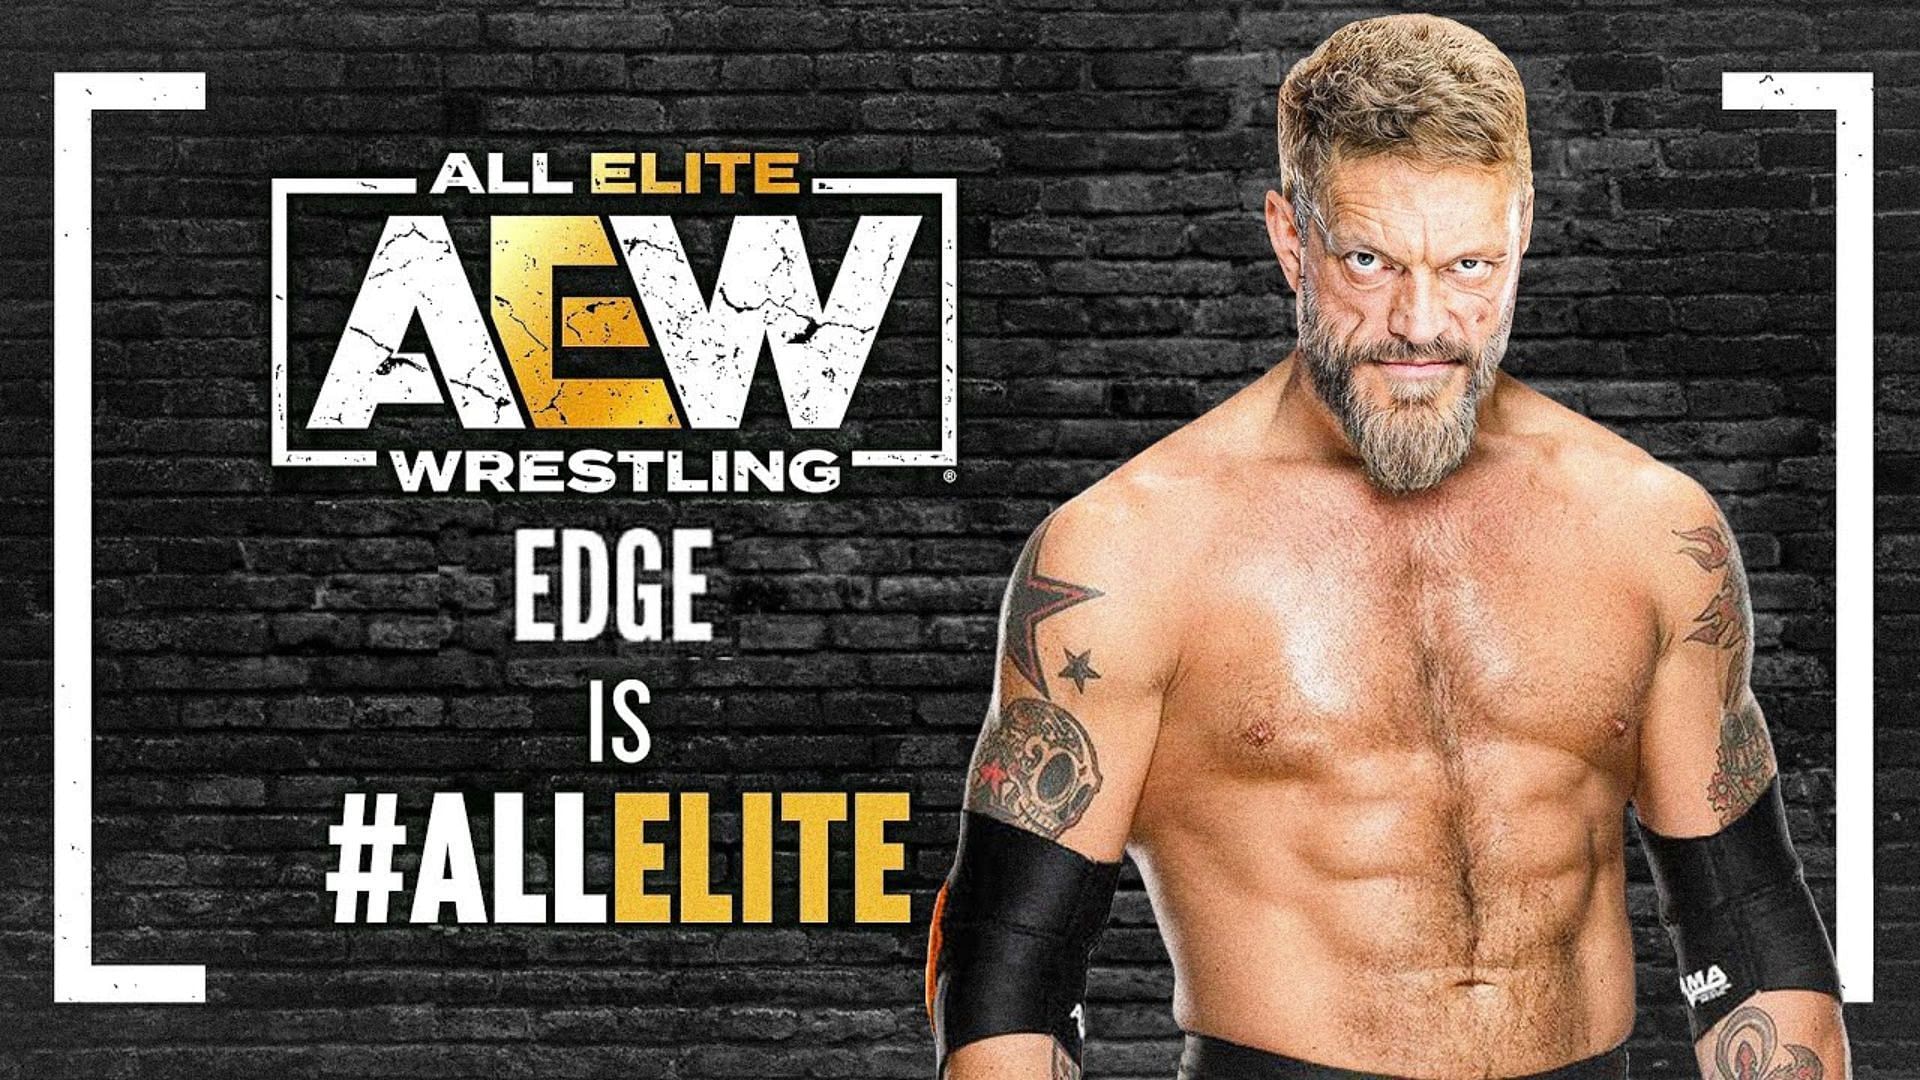 Edge recently chose AEW as his new wrestling abode.